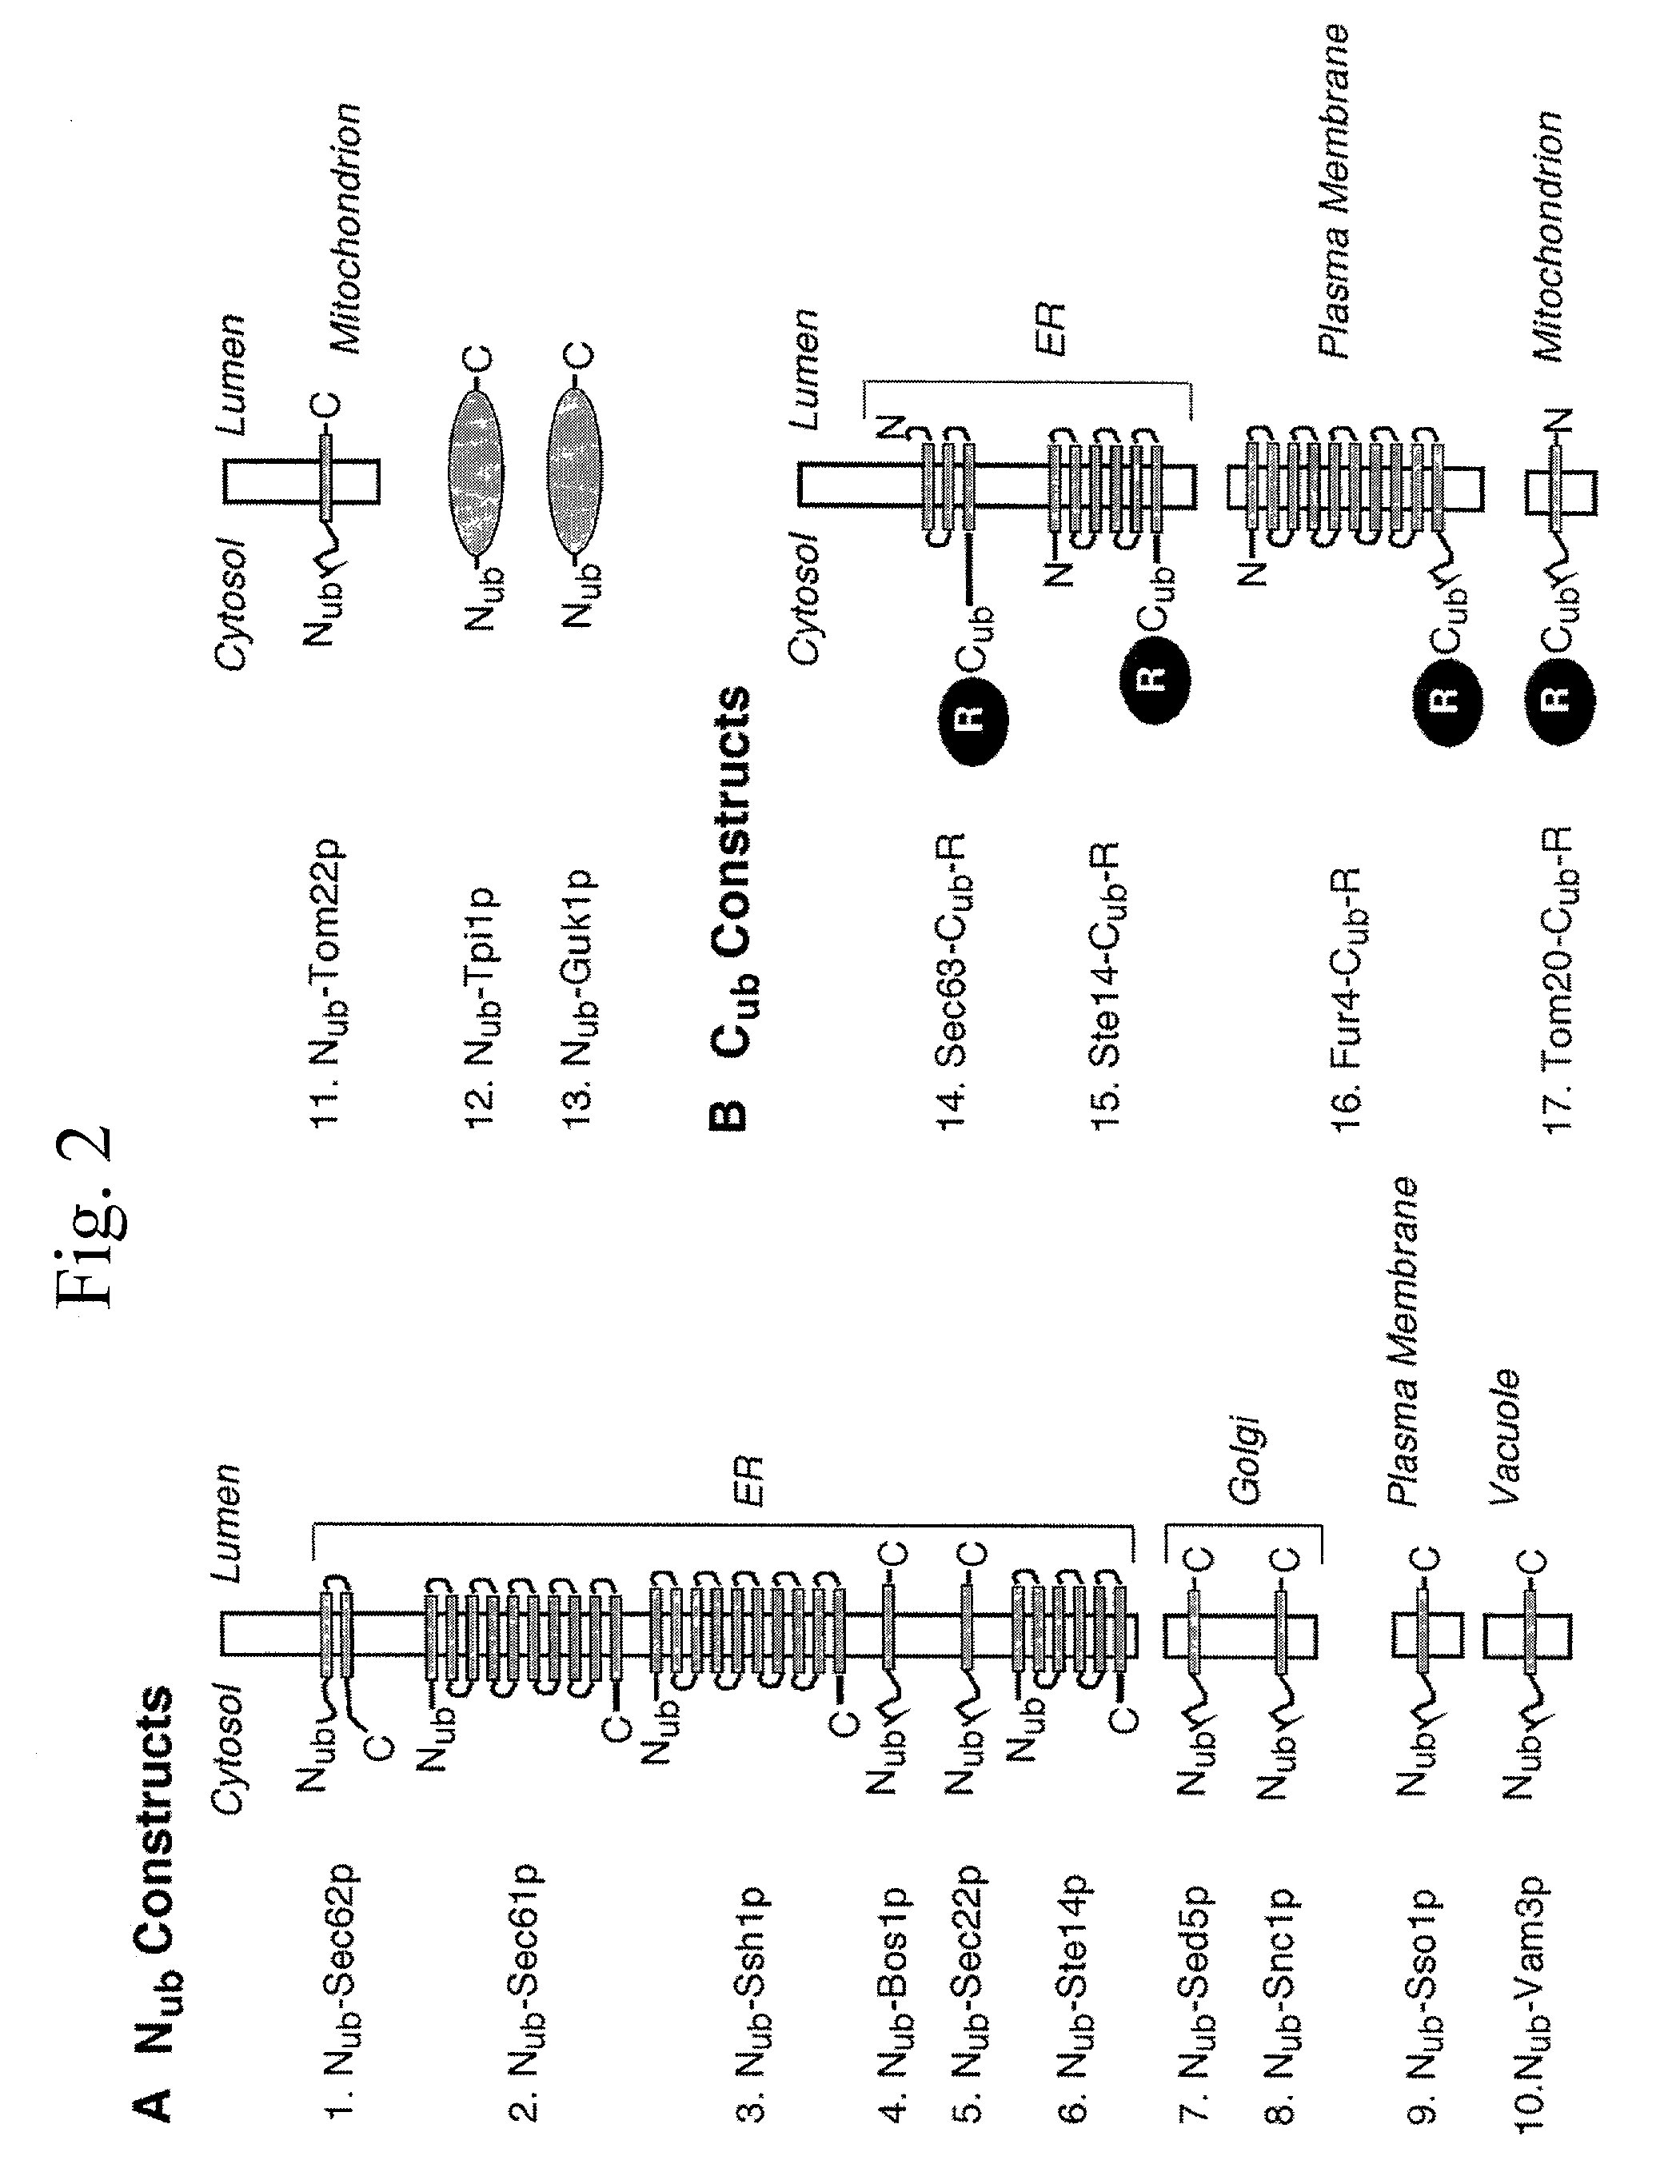 Split- ubiquitin based reporter systems and methods of their use